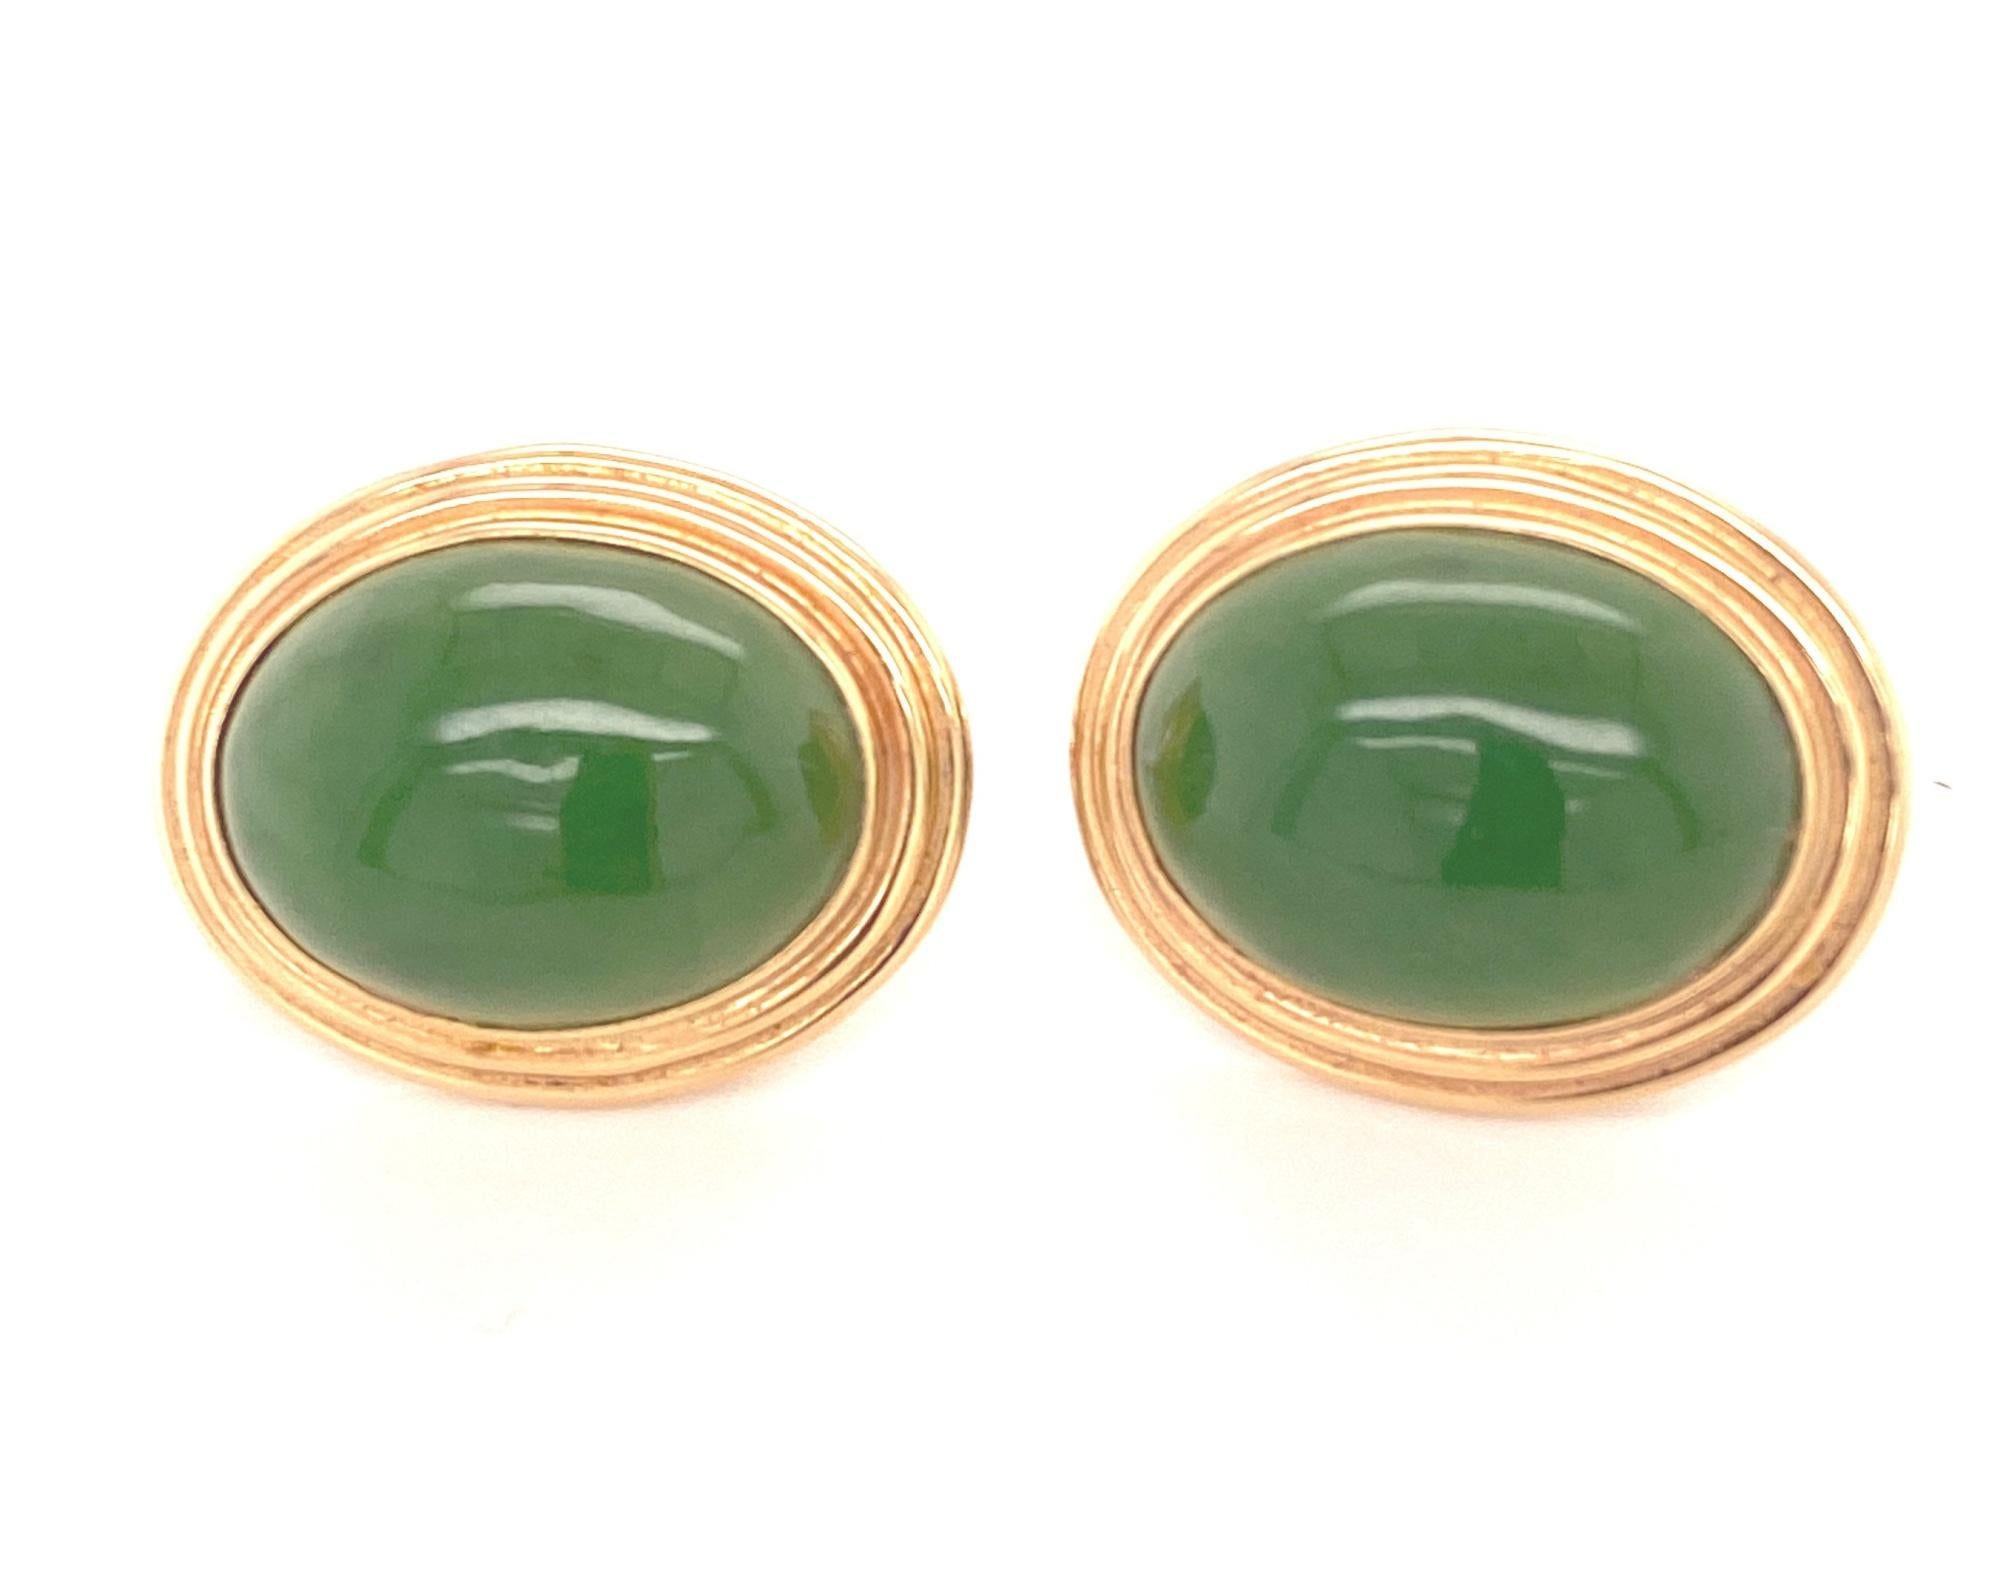 This is a stunning pair of natural jade earrings by Gump's. The earrings have oval shaped cabochons that have a nice green color and they are translucent. The earrings are marked Gump's 14K. They are in excellent condition. Measure 20.5mm high by